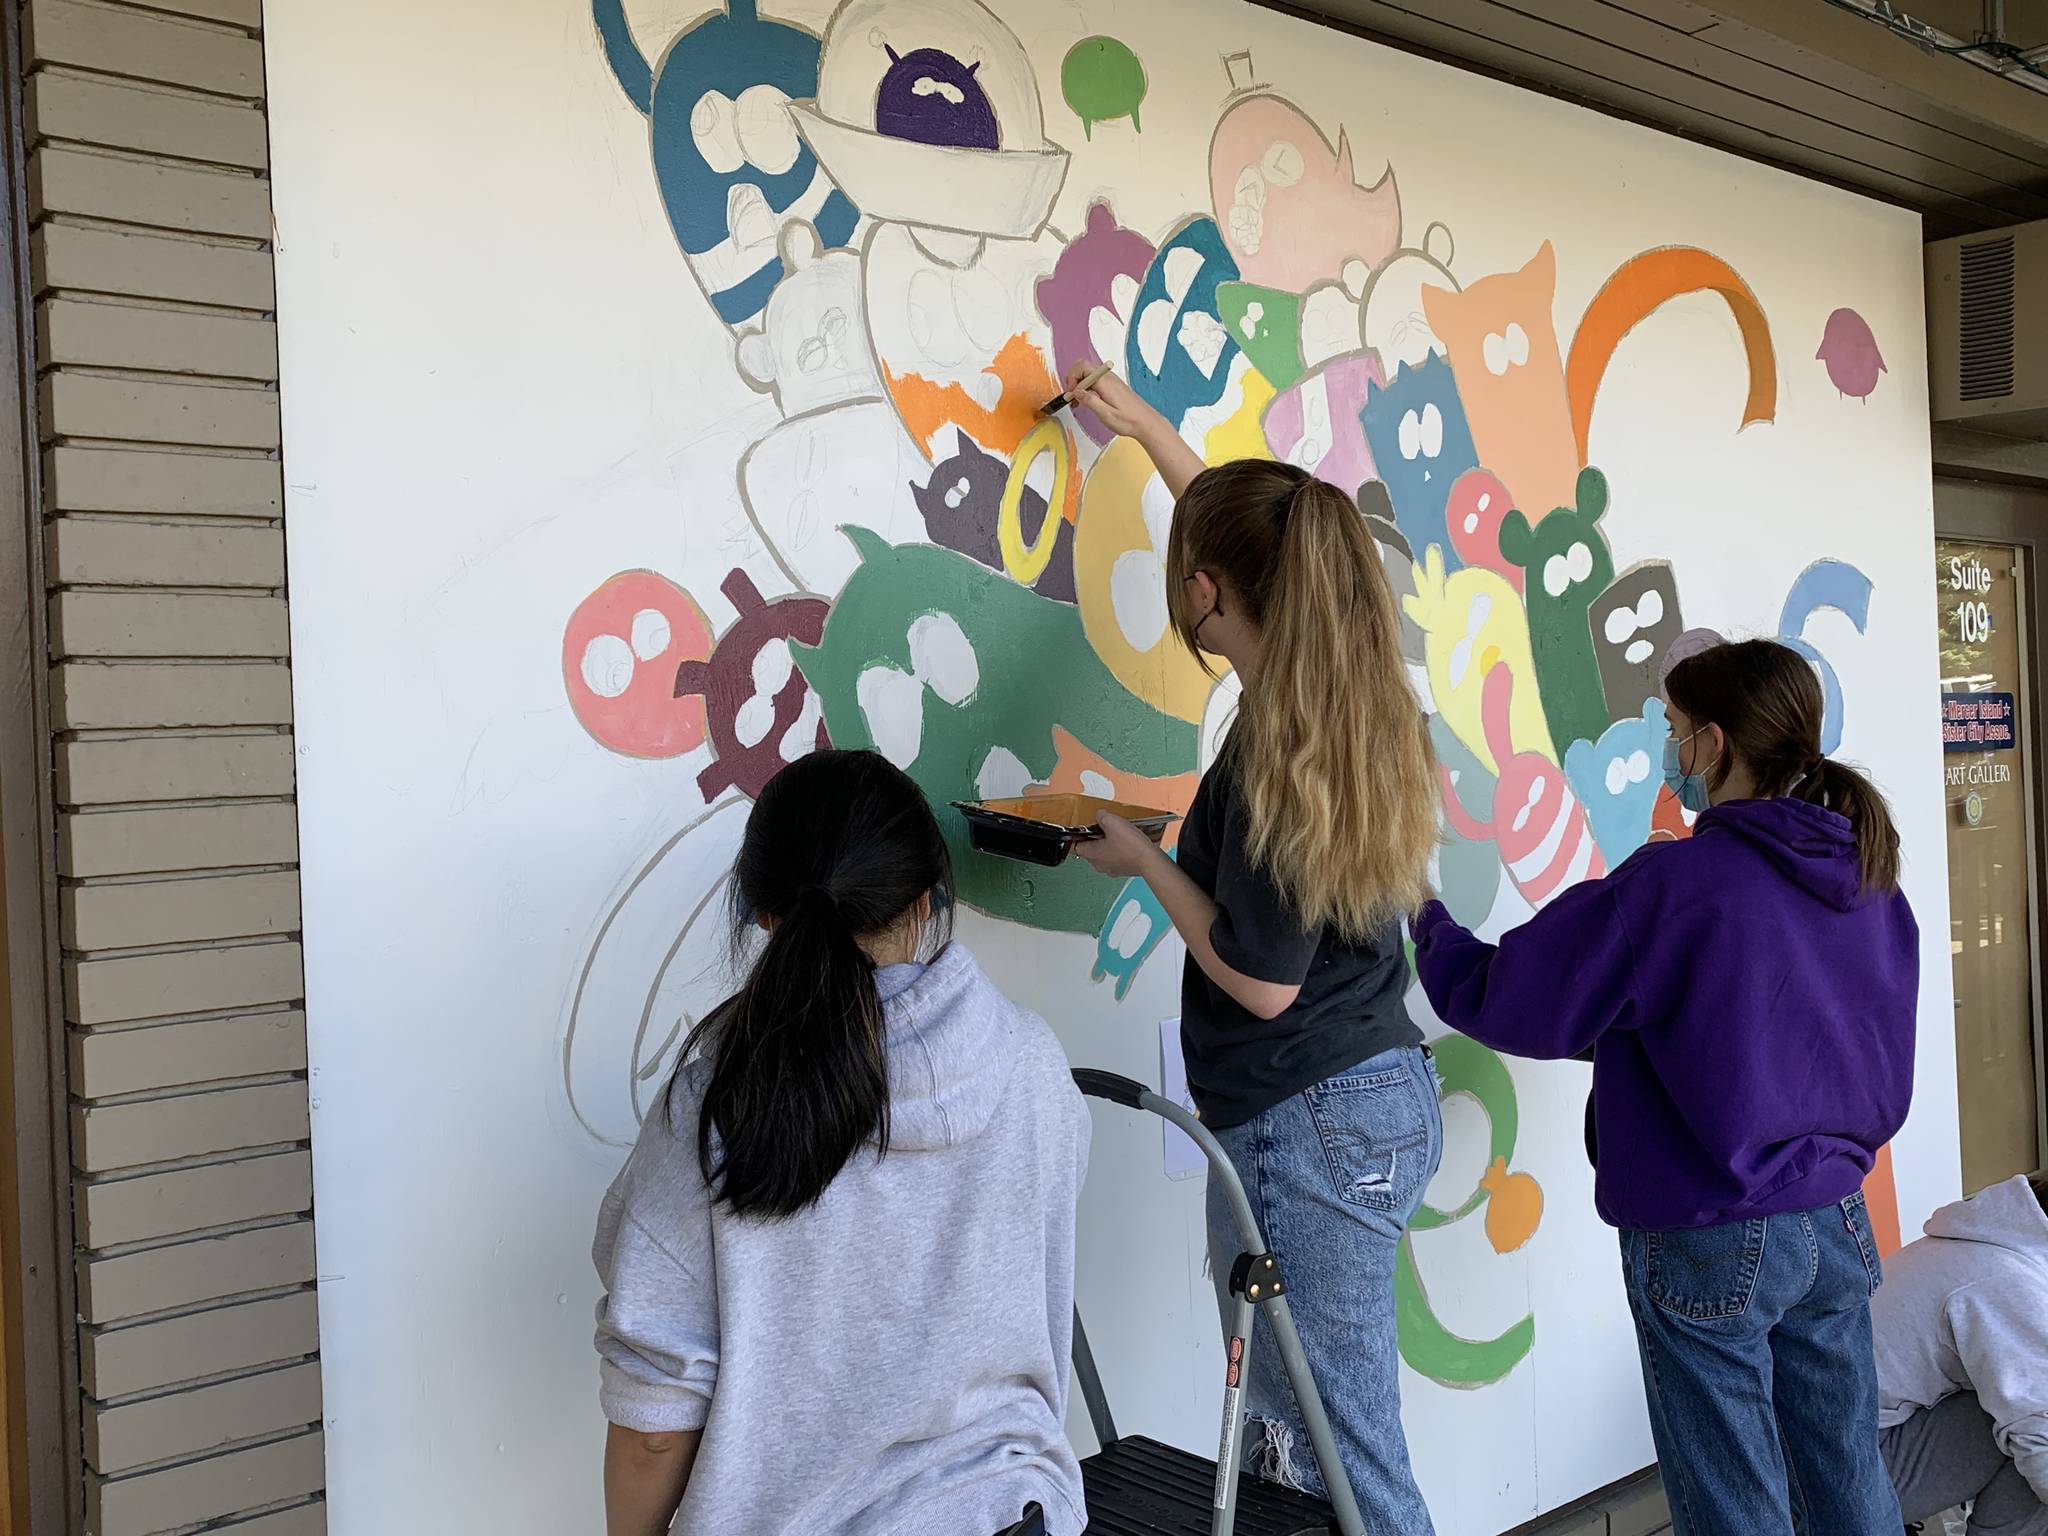 Members of the Mercer Island High School Art Club paint a mural on a recent day, in conjunction with the Mercer Island Visual Arts League (MIVAL), at the Mercer Island Chamber of Commerce building. Photo courtesy of Greg Asimakoupoulos